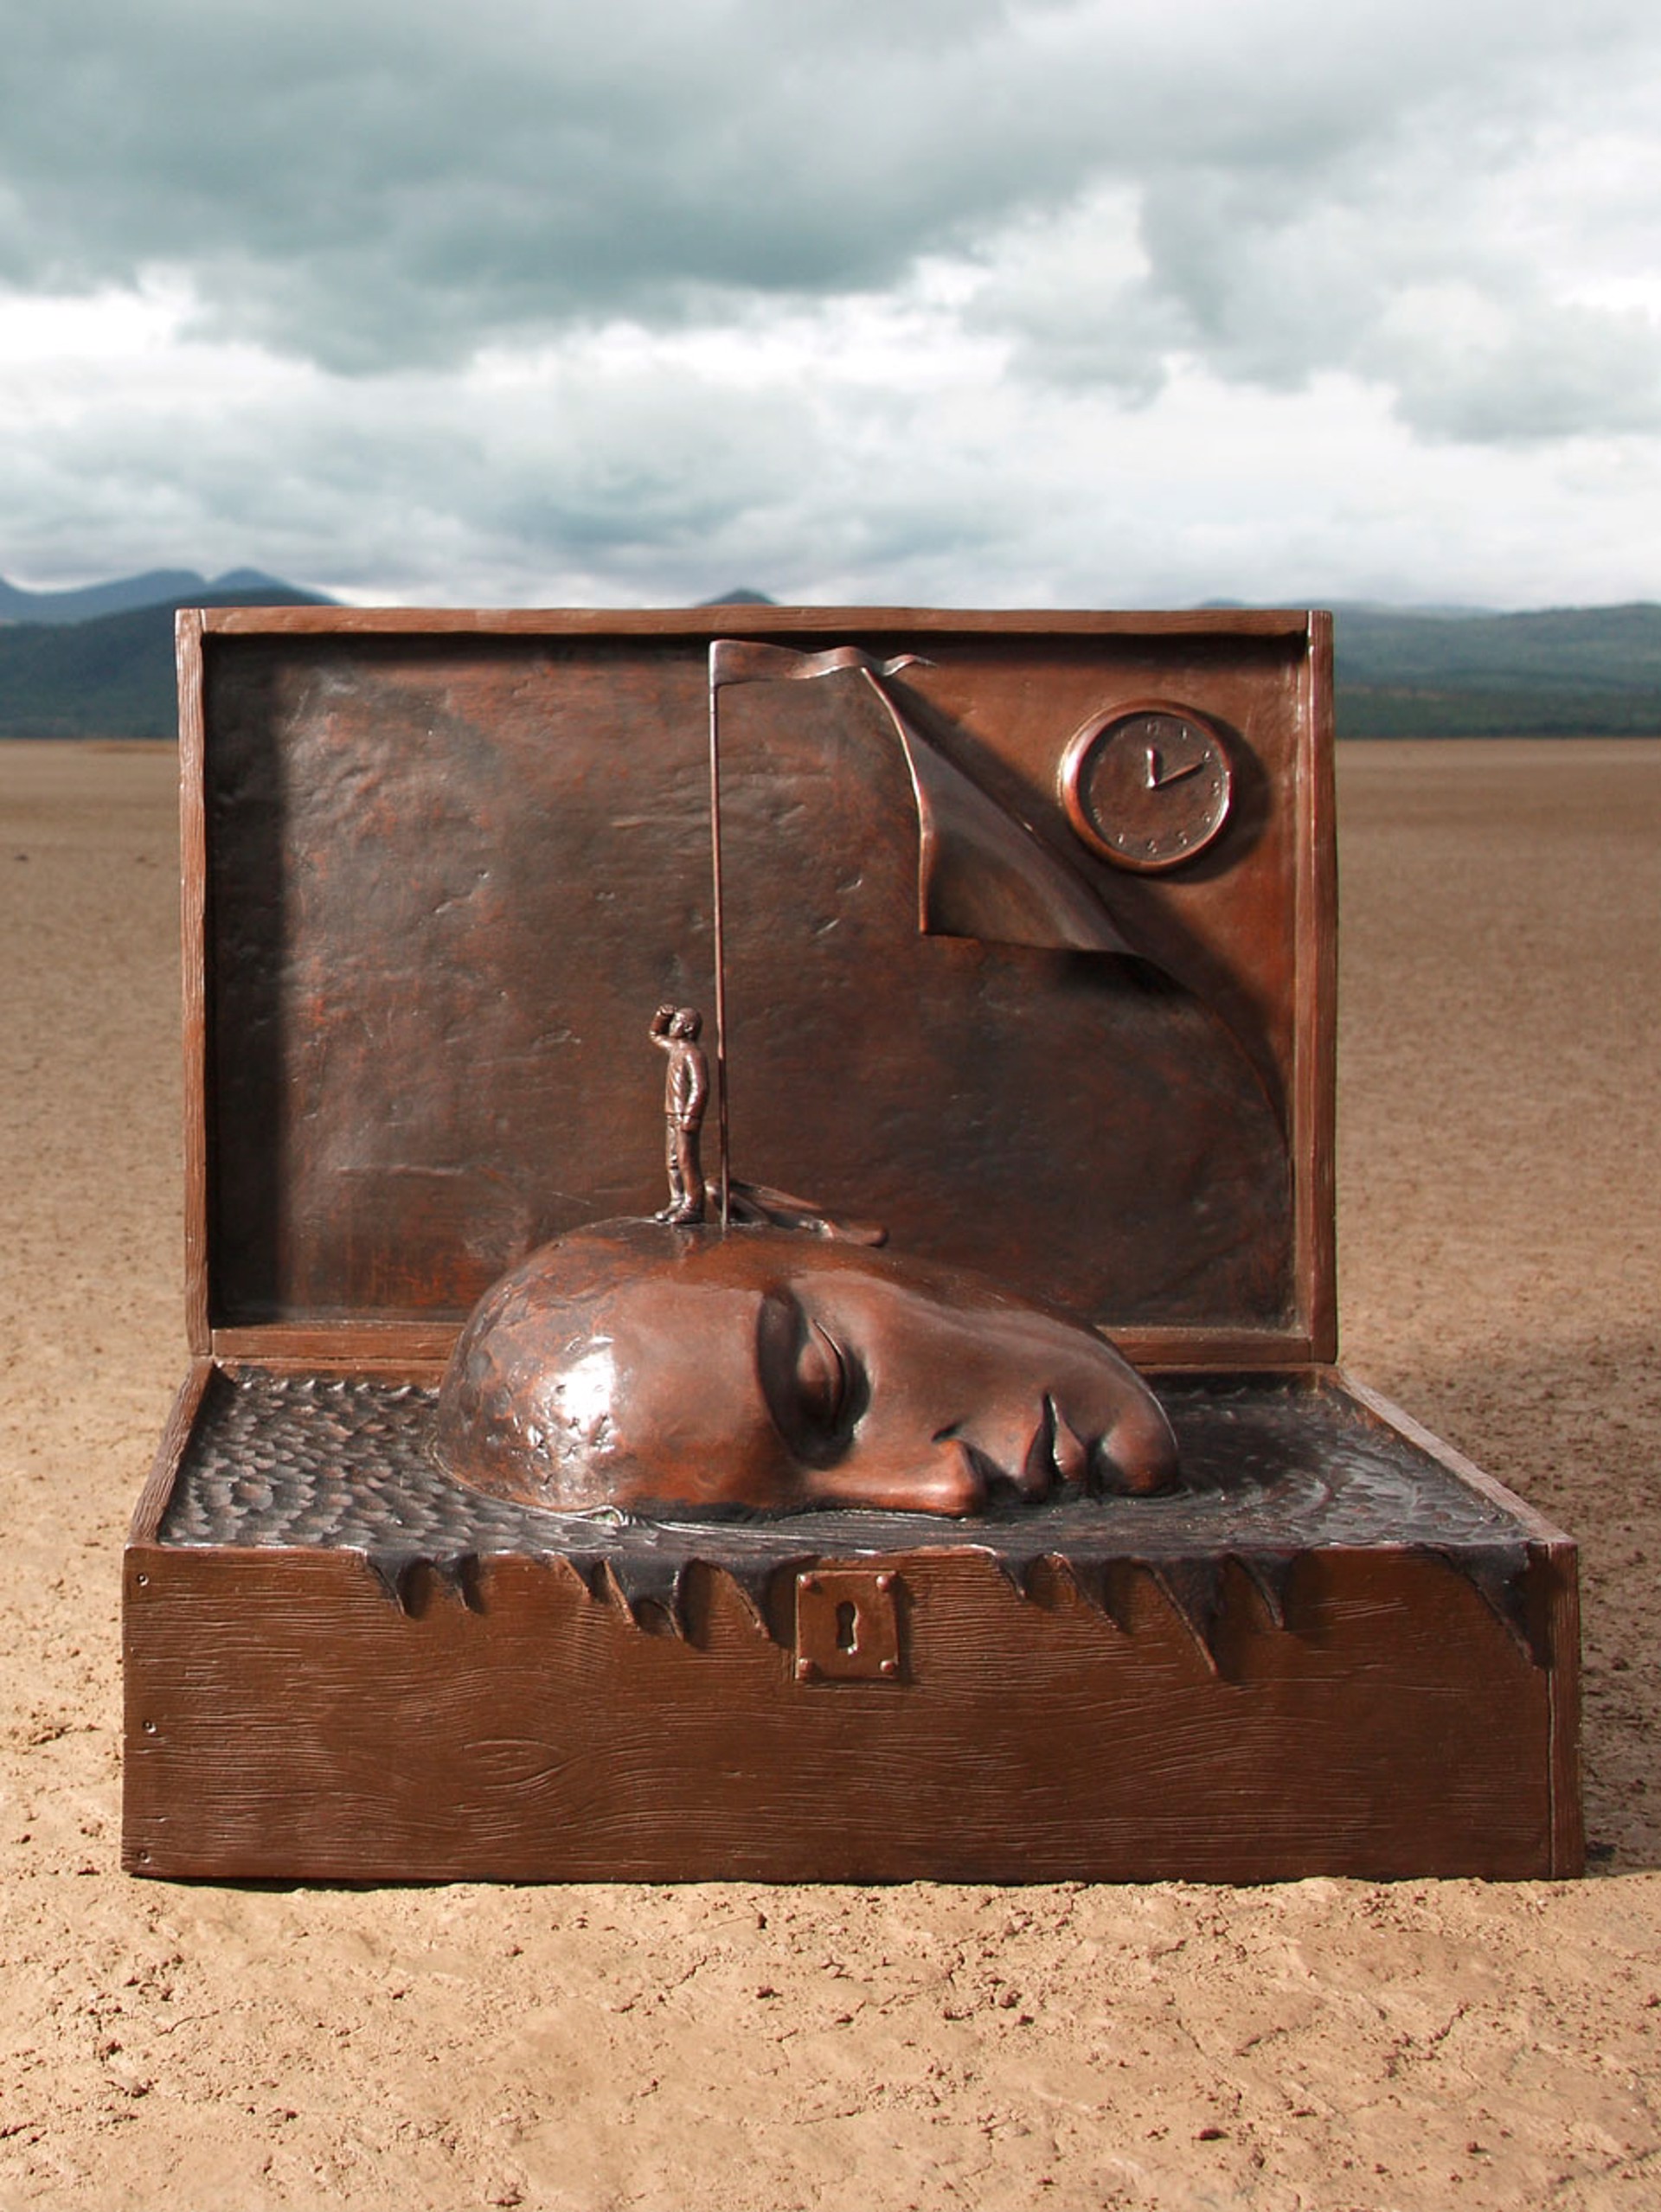 The Memory of the Navigator by Sergio Bustamante (sculptor)